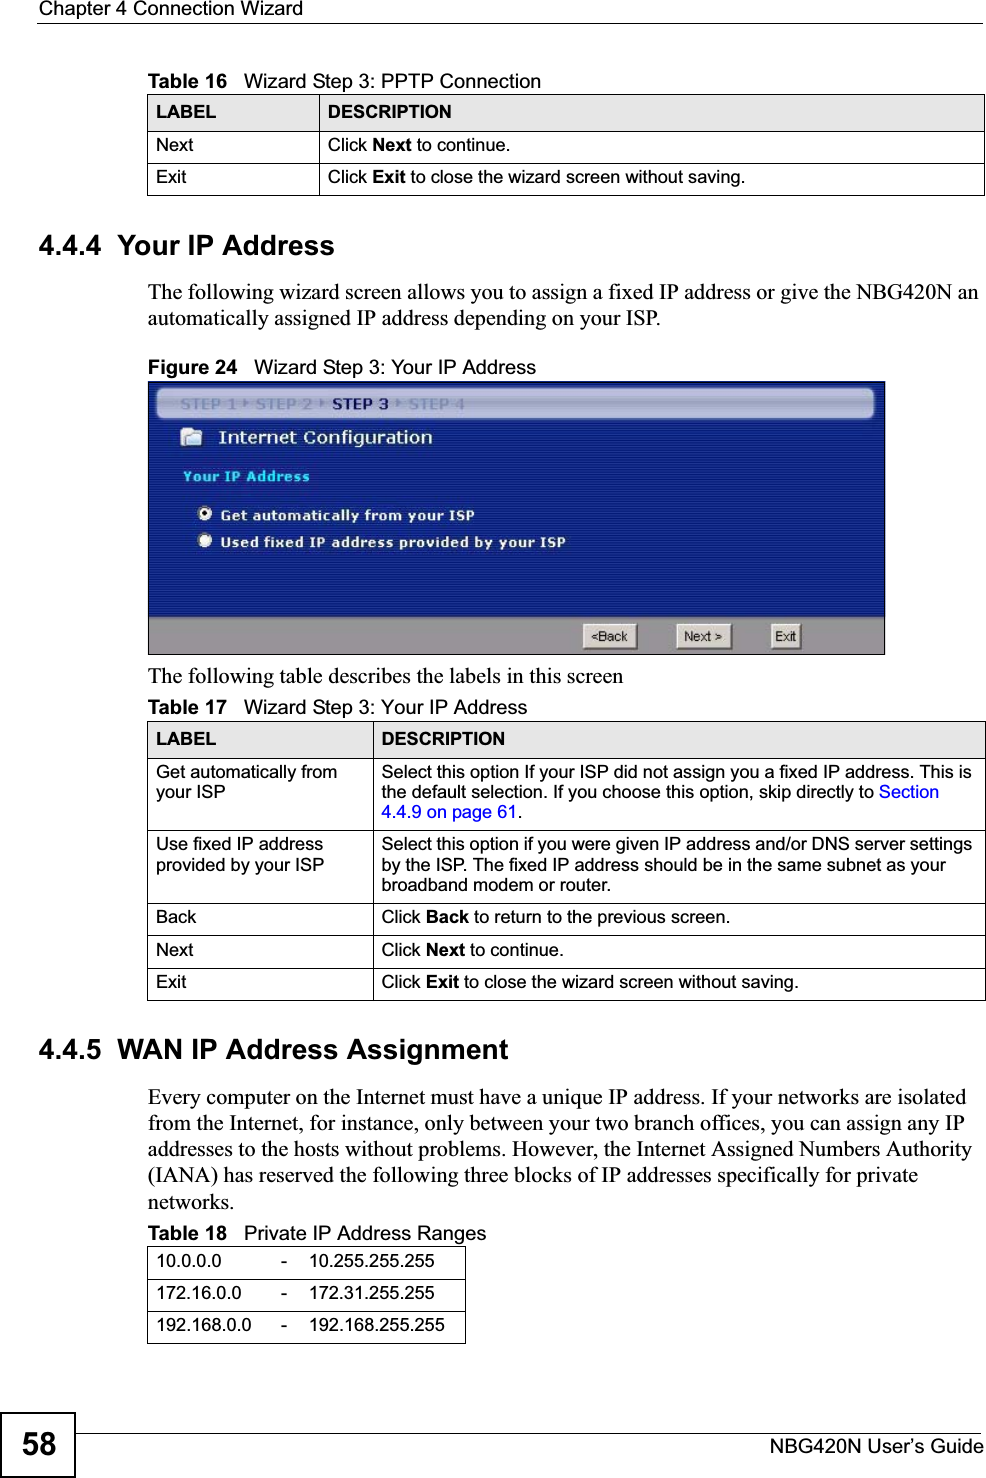 Chapter 4 Connection WizardNBG420N User’s Guide584.4.4  Your IP AddressThe following wizard screen allows you to assign a fixed IP address or give the NBG420N an automatically assigned IP address depending on your ISP.Figure 24   Wizard Step 3: Your IP AddressThe following table describes the labels in this screen4.4.5  WAN IP Address AssignmentEvery computer on the Internet must have a unique IP address. If your networks are isolated from the Internet, for instance, only between your two branch offices, you can assign any IP addresses to the hosts without problems. However, the Internet Assigned Numbers Authority (IANA) has reserved the following three blocks of IP addresses specifically for private networks.Next Click Next to continue. Exit Click Exit to close the wizard screen without saving.Table 16   Wizard Step 3: PPTP ConnectionLABEL DESCRIPTIONTable 17   Wizard Step 3: Your IP AddressLABEL DESCRIPTIONGet automatically from your ISP Select this option If your ISP did not assign you a fixed IP address. This is the default selection. If you choose this option, skip directly to Section4.4.9 on page 61.Use fixed IP address provided by your ISPSelect this option if you were given IP address and/or DNS server settings by the ISP. The fixed IP address should be in the same subnet as your broadband modem or router. Back Click Back to return to the previous screen.Next Click Next to continue. Exit Click Exit to close the wizard screen without saving.Table 18   Private IP Address Ranges10.0.0.0 -10.255.255.255172.16.0.0 -172.31.255.255192.168.0.0 -192.168.255.255